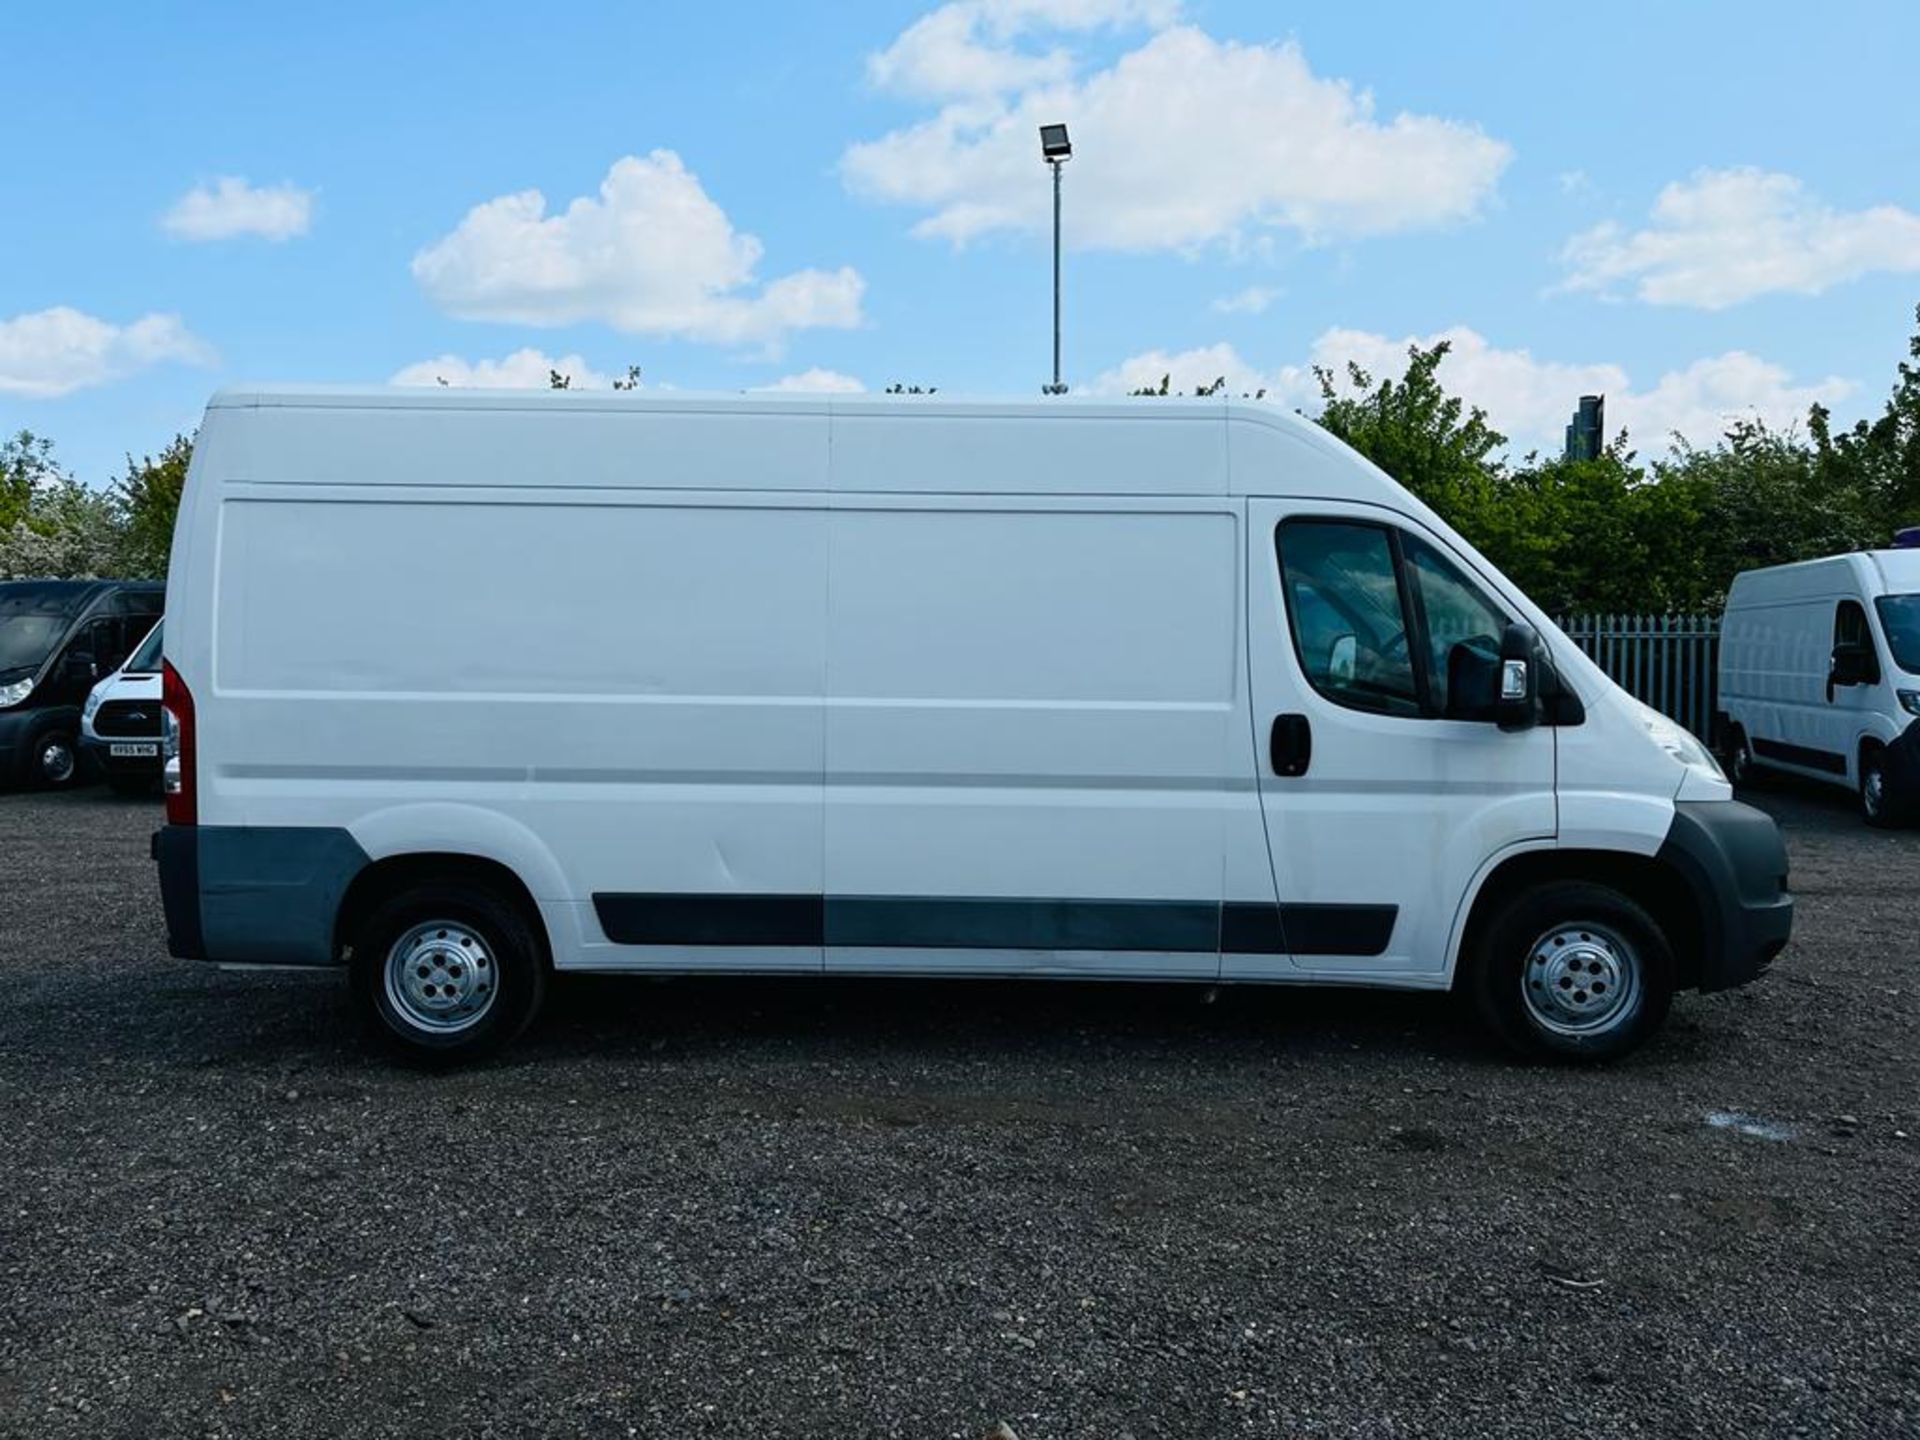 ** ON SALE ** Citreon Relay 2.2 HDI 35 120 L3 H2 2011 '11 Reg' - Panel Van - Only 89,374 Miles - Image 9 of 23